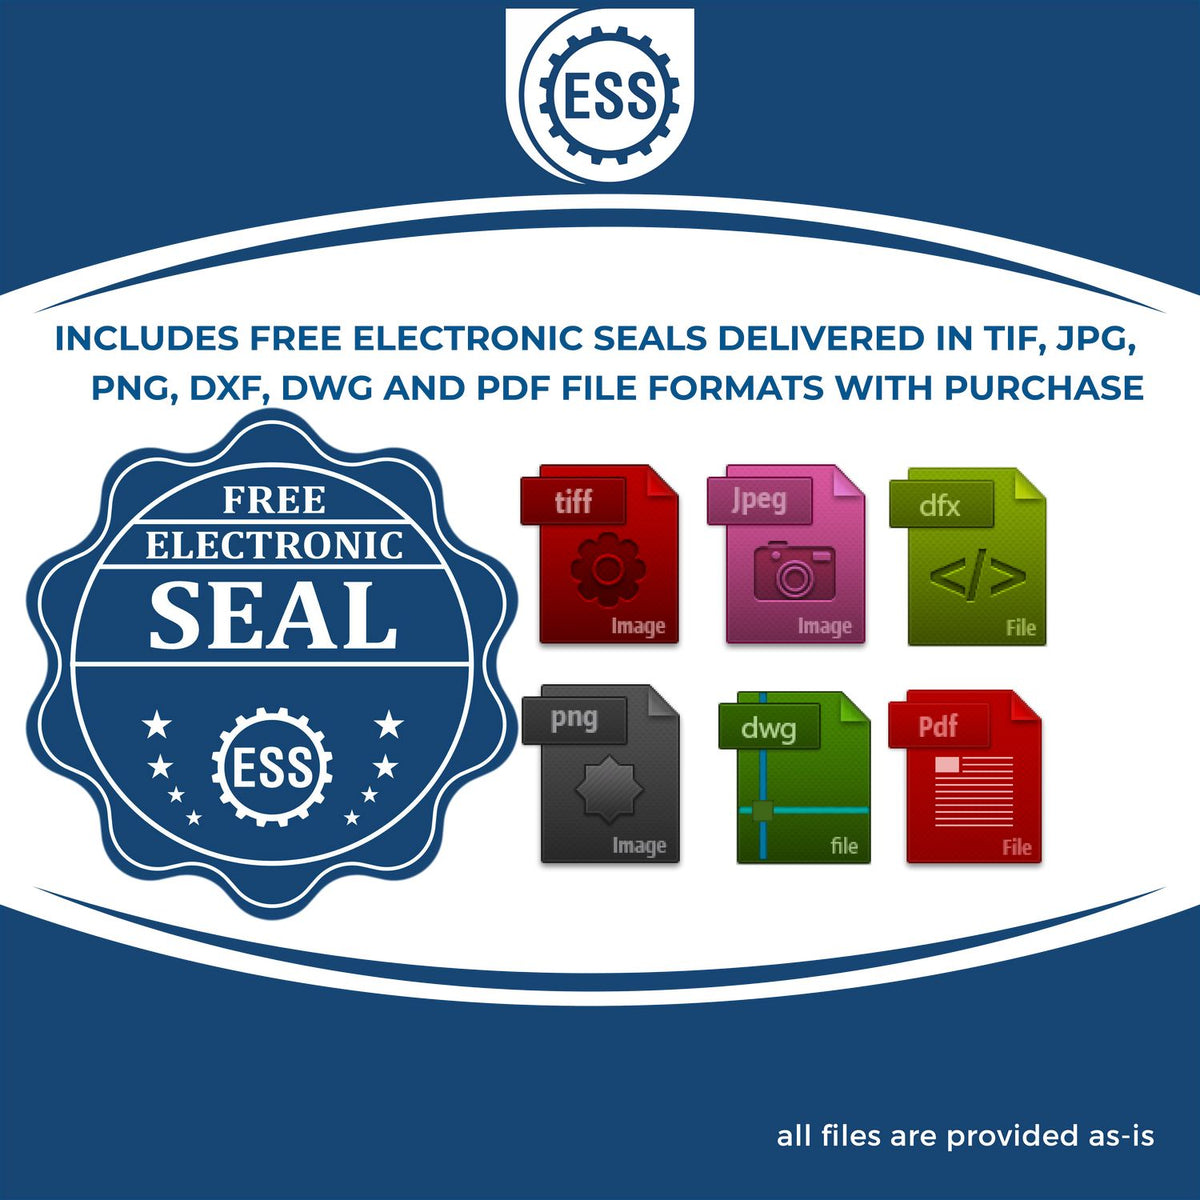 An infographic for the free electronic seal for the Alabama Engineer Desk Seal illustrating the different file type icons such as DXF, DWG, TIF, JPG and PNG.